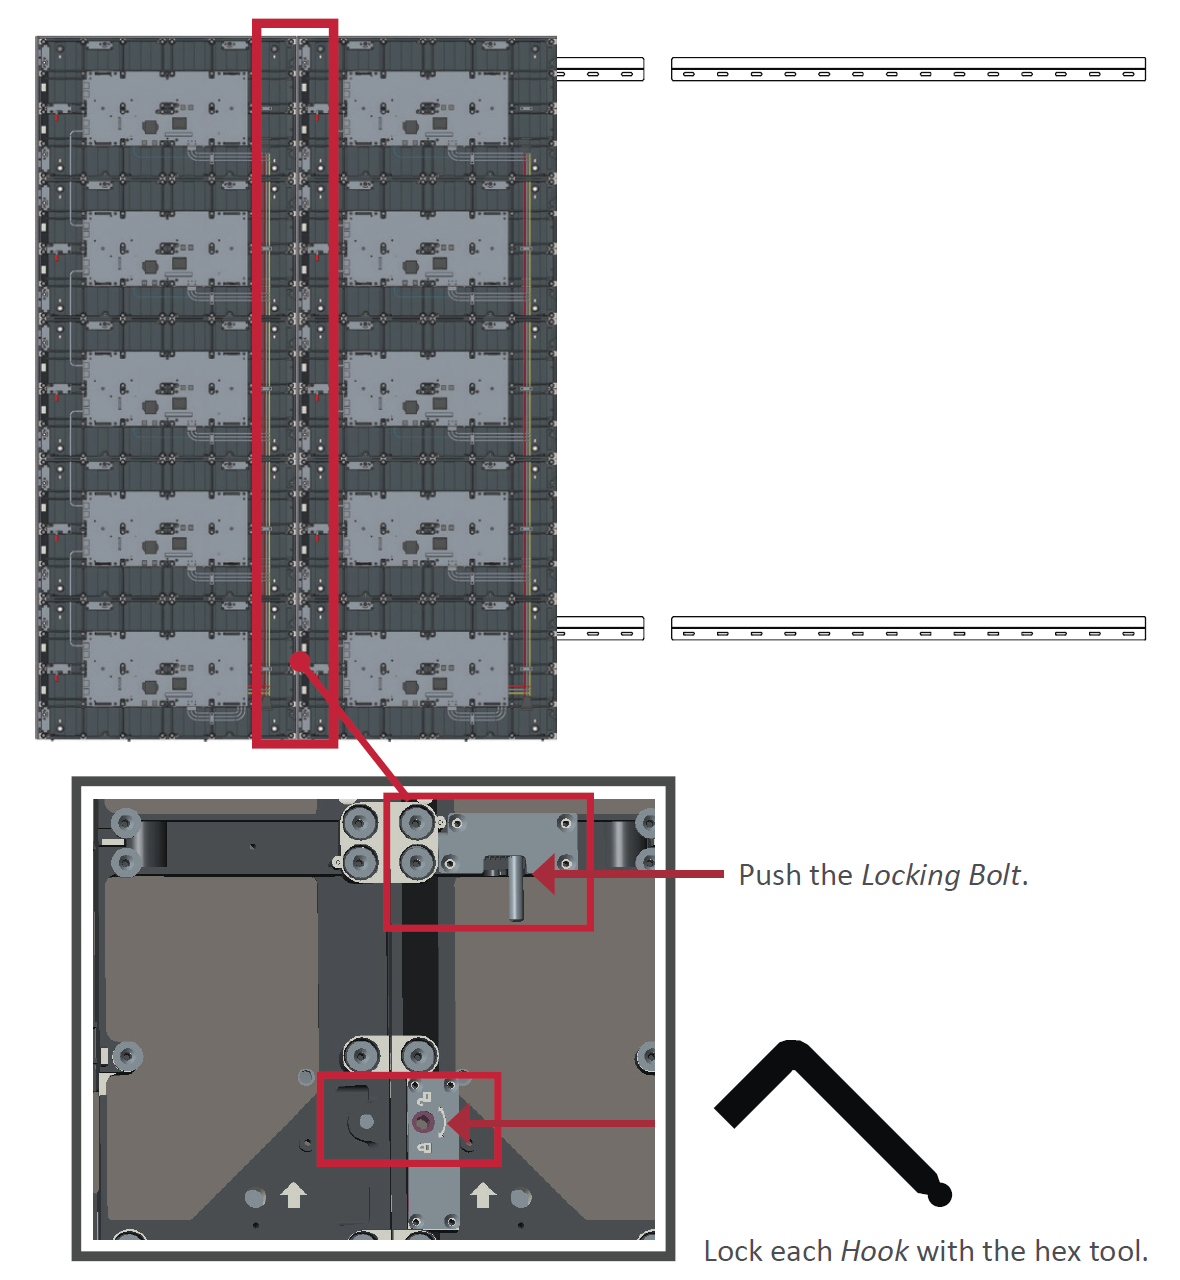 File:LDP135-151 Wall Mounting Connecting Screens.png